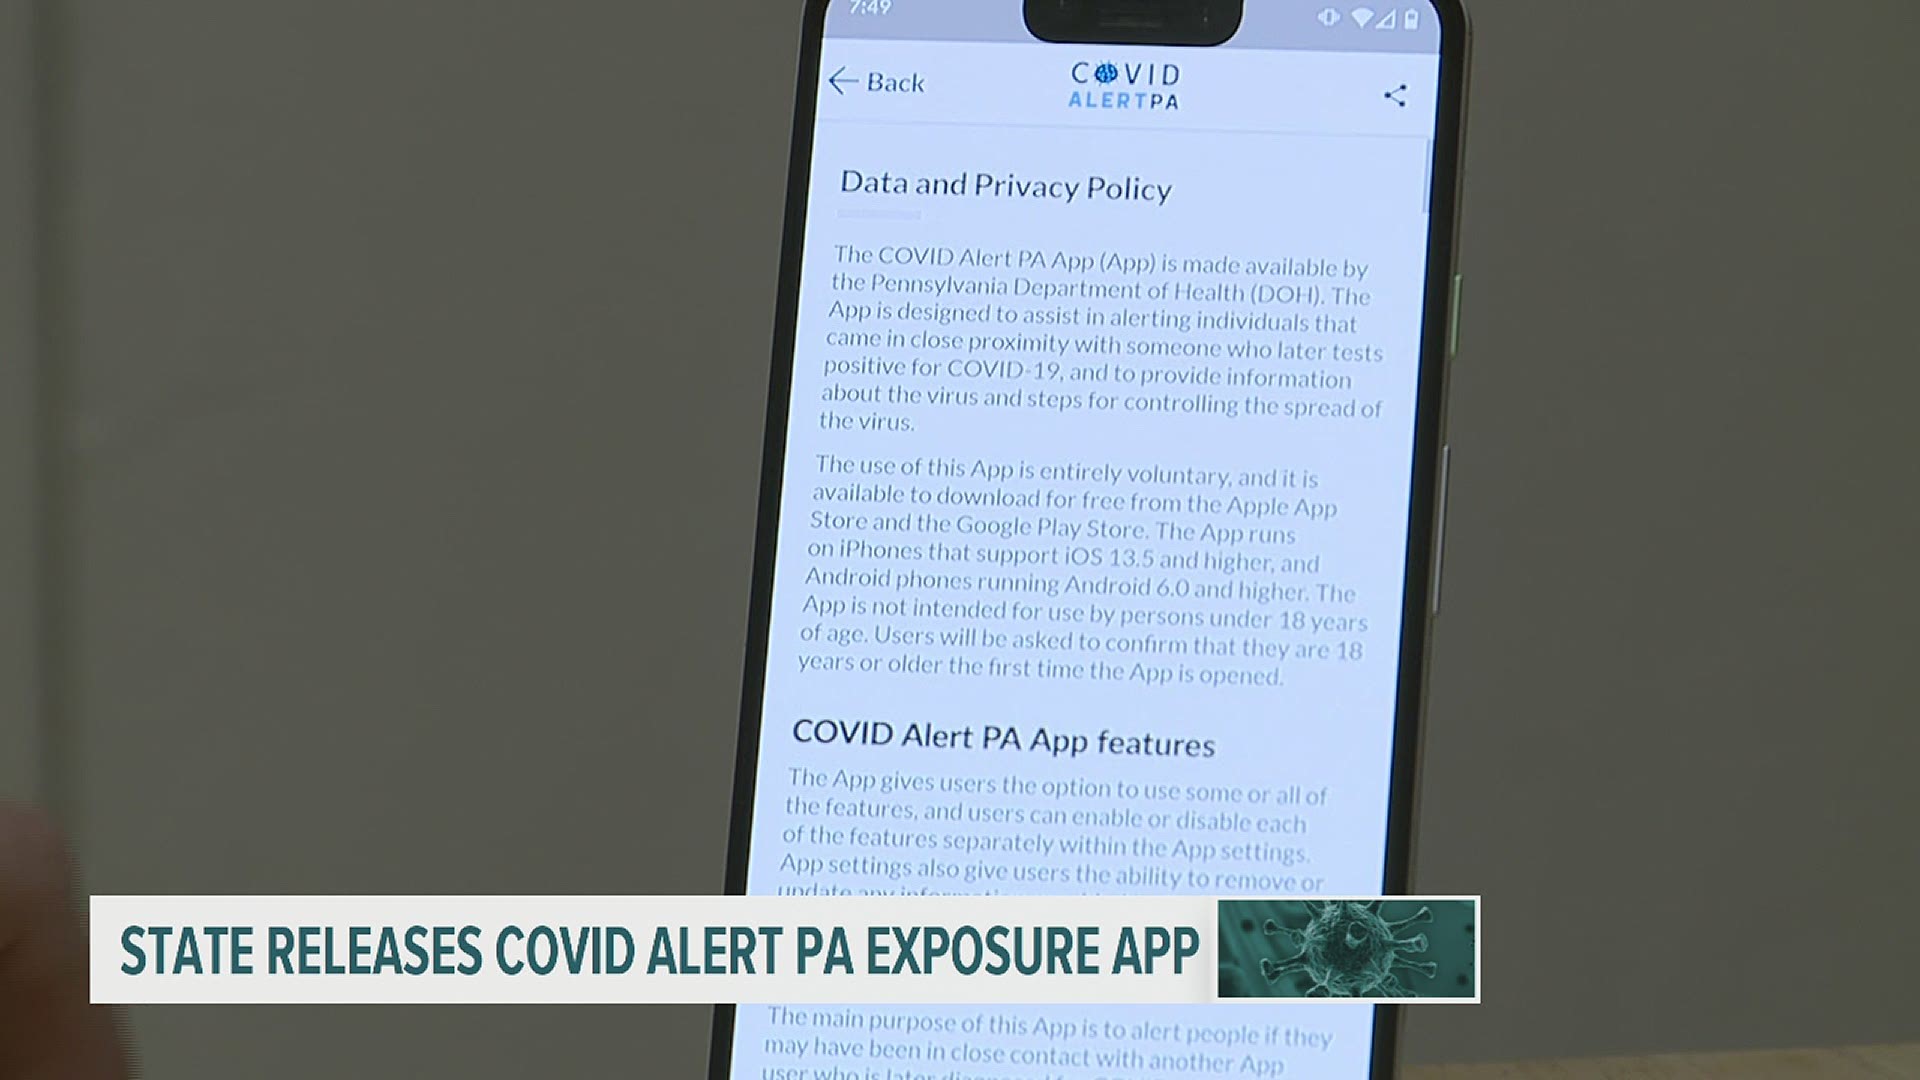 After the launch of a new coronavirus exposure notification app, state officials encouraged the public the download the app and assured them it is secure.